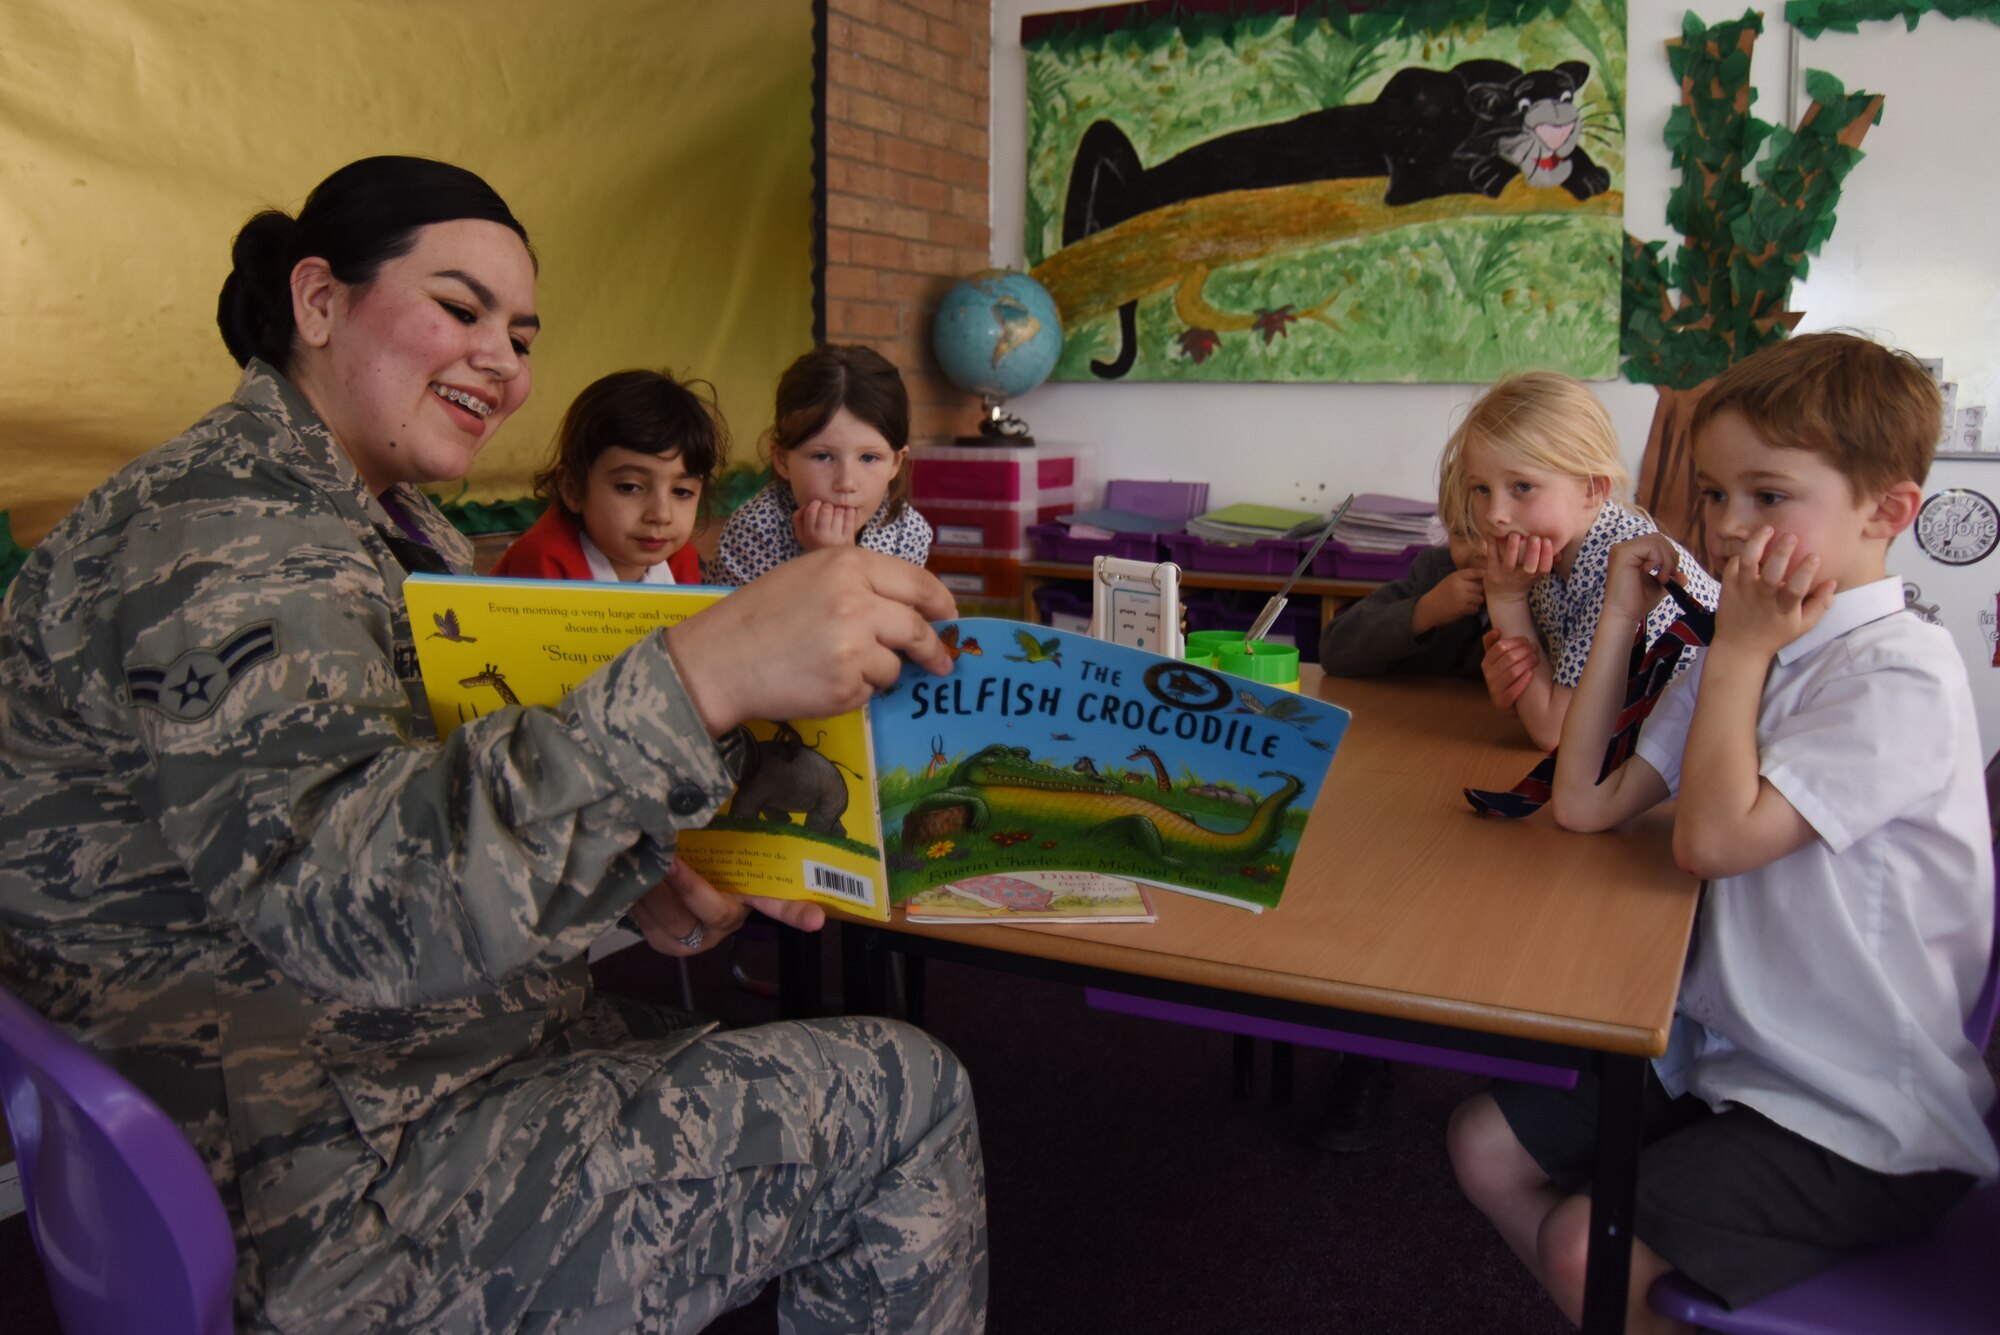 Airman 1st Class Sirinity Berganza-Campos, 48th Dental Squadron dental assistant, reads to a group of children at Brookes Cambridge school in Bury St. Edmunds, England, April 17, 2018. Six Liberty Wing Airmen visited the school to read with the students and build relationships in the community. (U.S. Air Force photo/Senior Airman Abby L. Finkel)